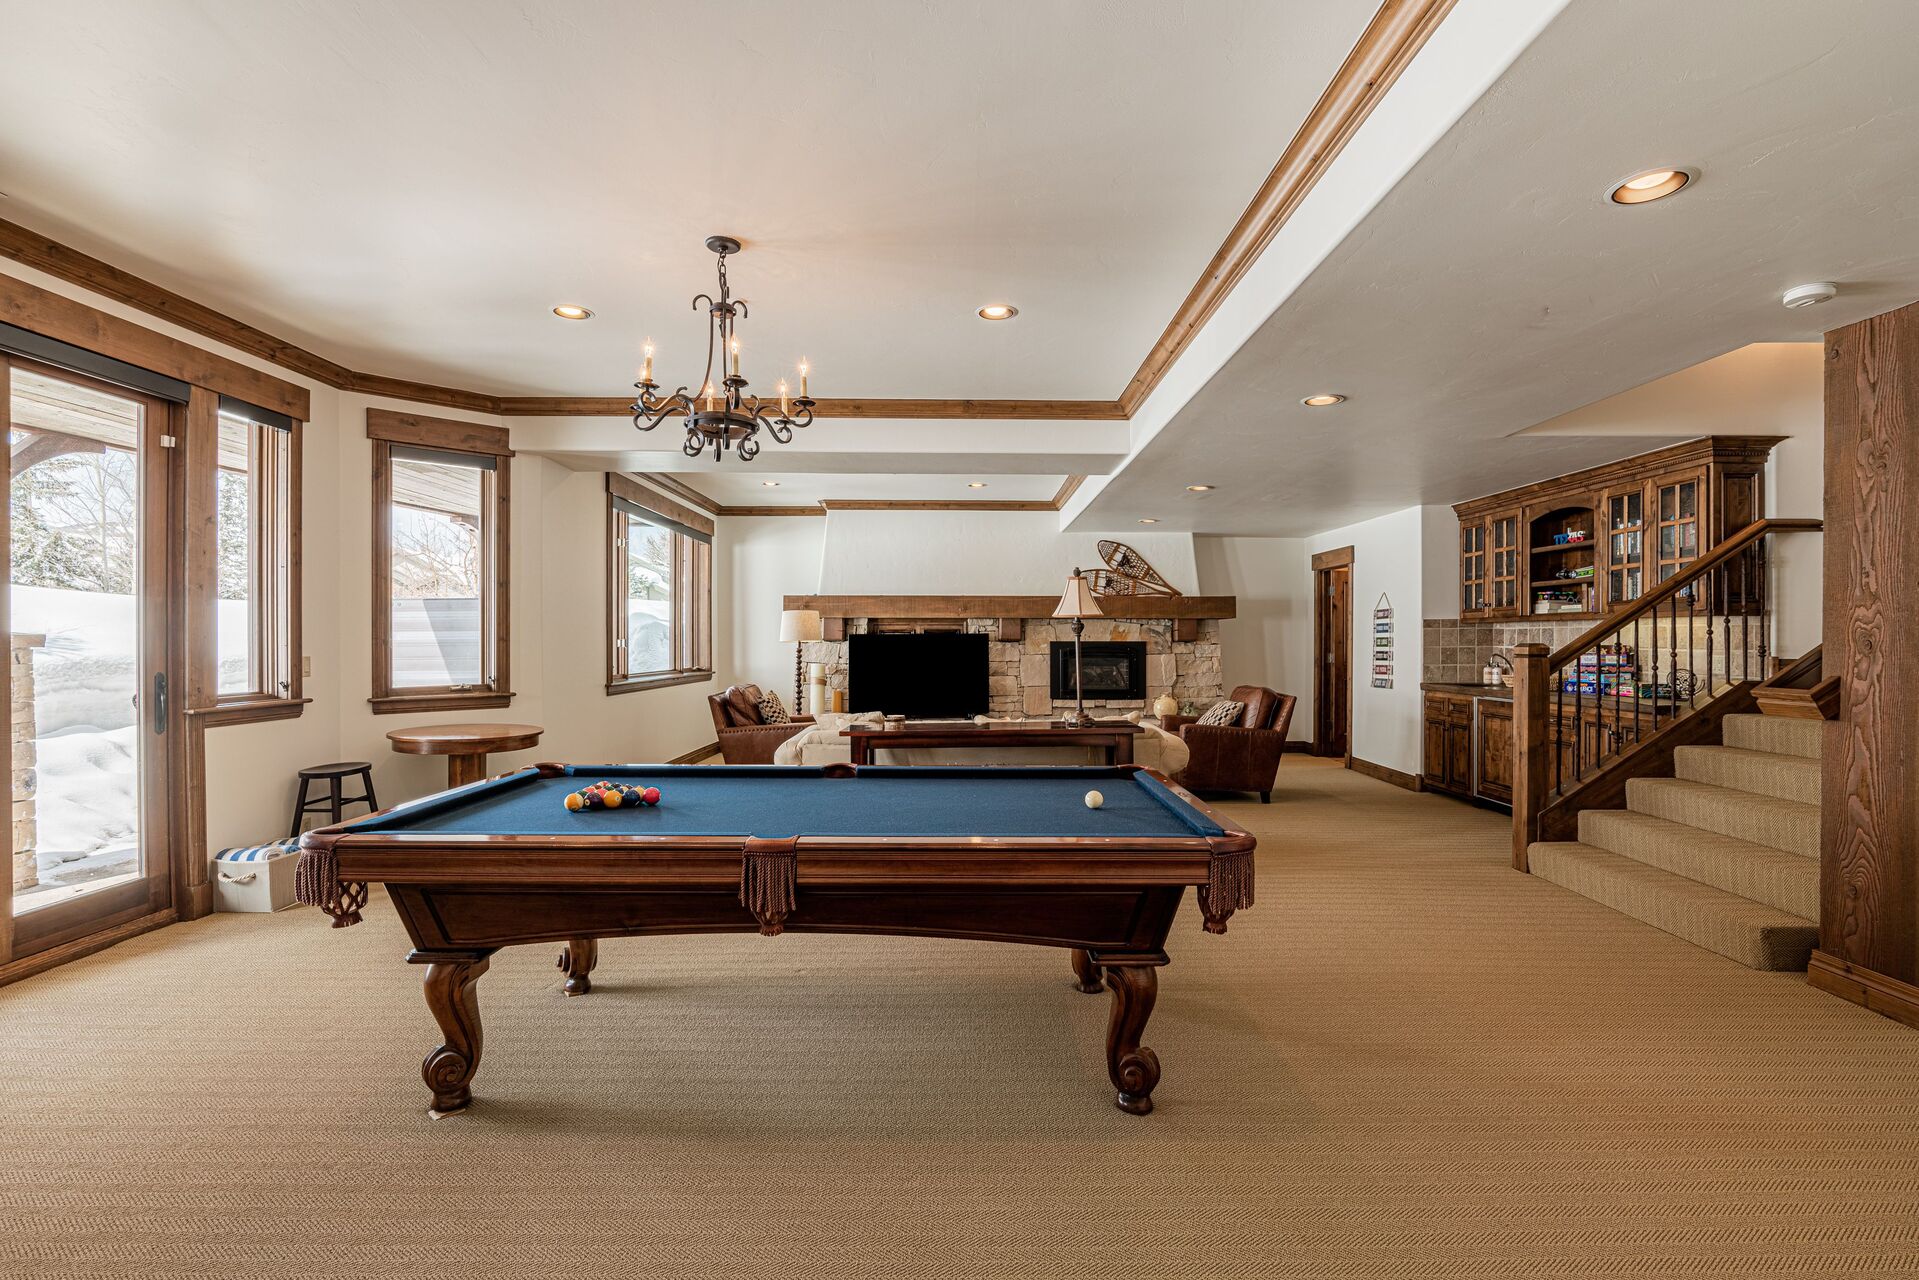 Lower Level Living and Game Room with plush sofa, leather arm chairs, gas fireplace, smart tv, wet bar, powder room, and billiards table